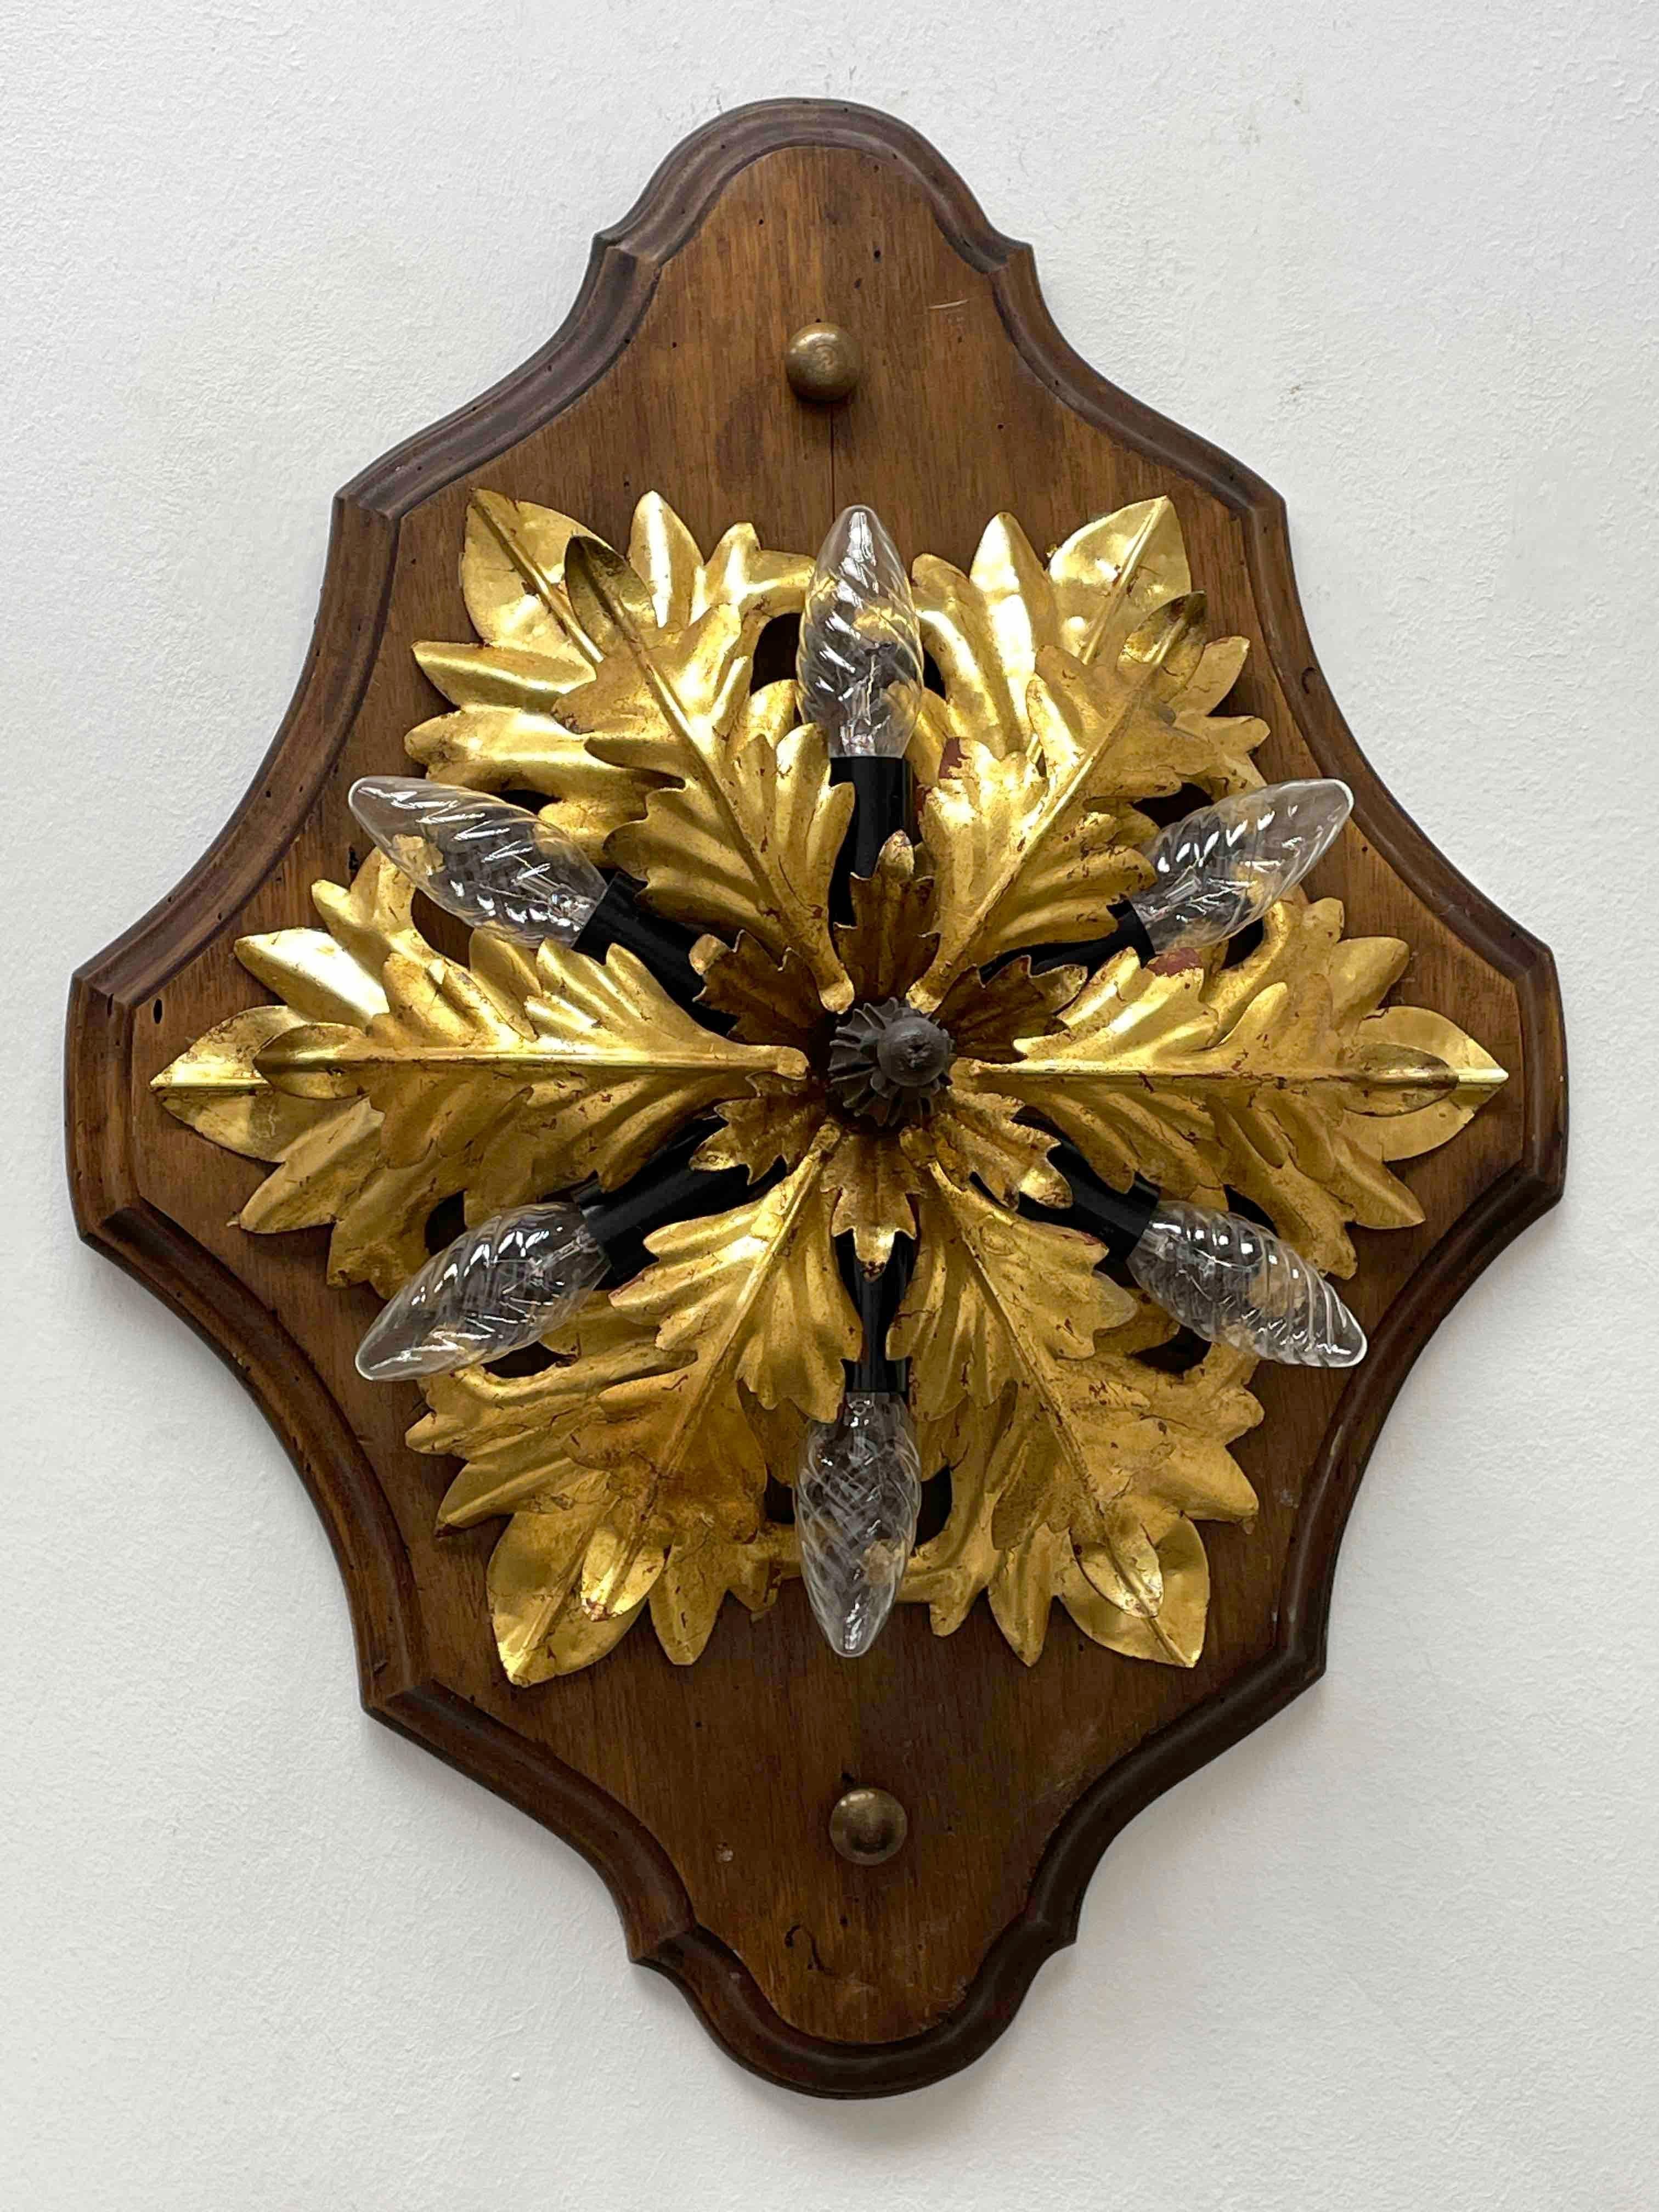 Add a touch of opulence to your home with this charming flush mount light. Perfect stunning gilt acanthus leaf design with a large wooden back, to enhance any chic or eclectic home. We'd love to see it hanging in an entryway as a charming welcome